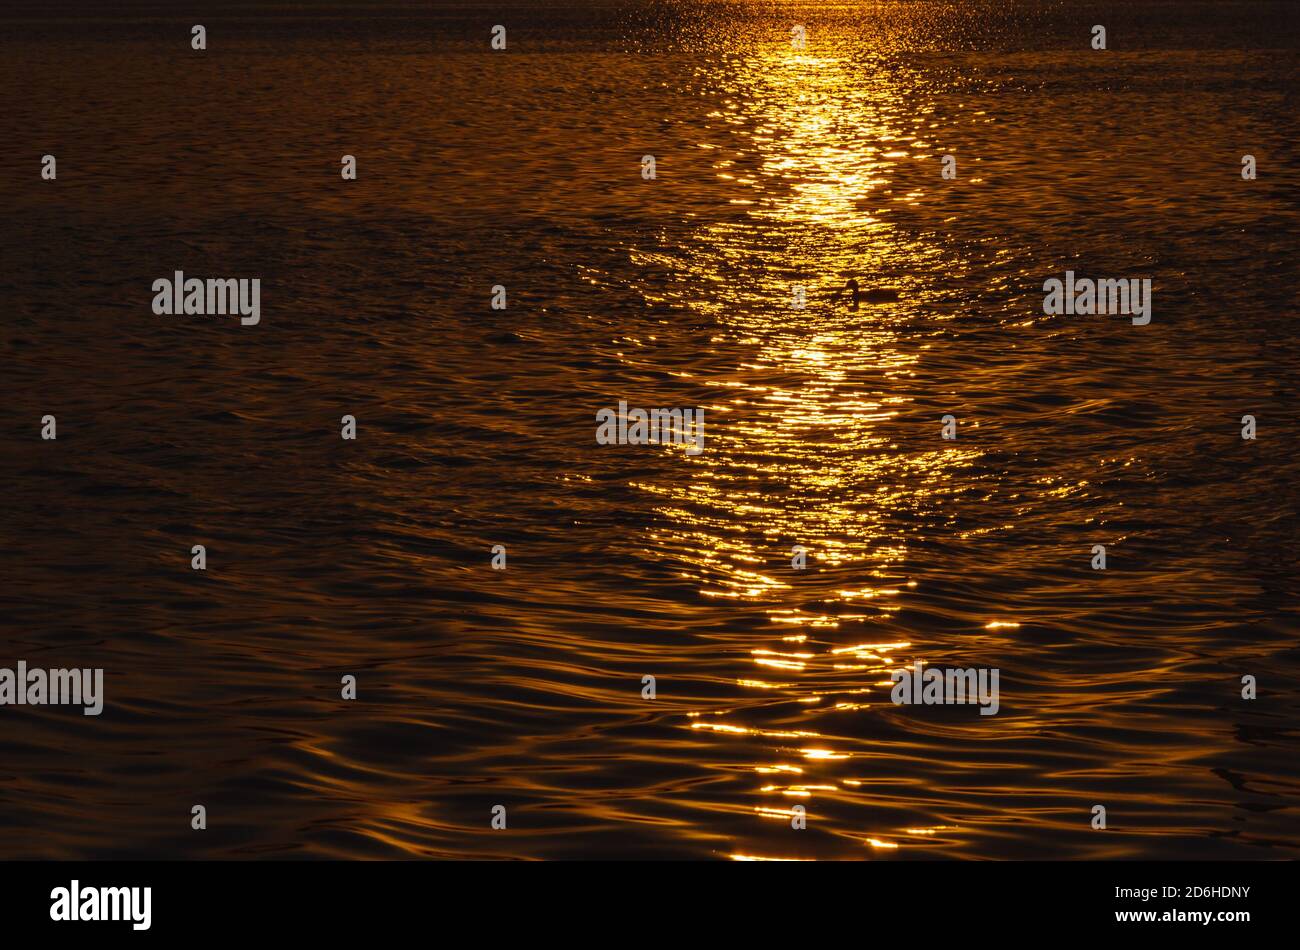 Beautiful sunset over the river. A duck in the solar path on the surface of the water. Reflection of the setting sun. Stock Photo